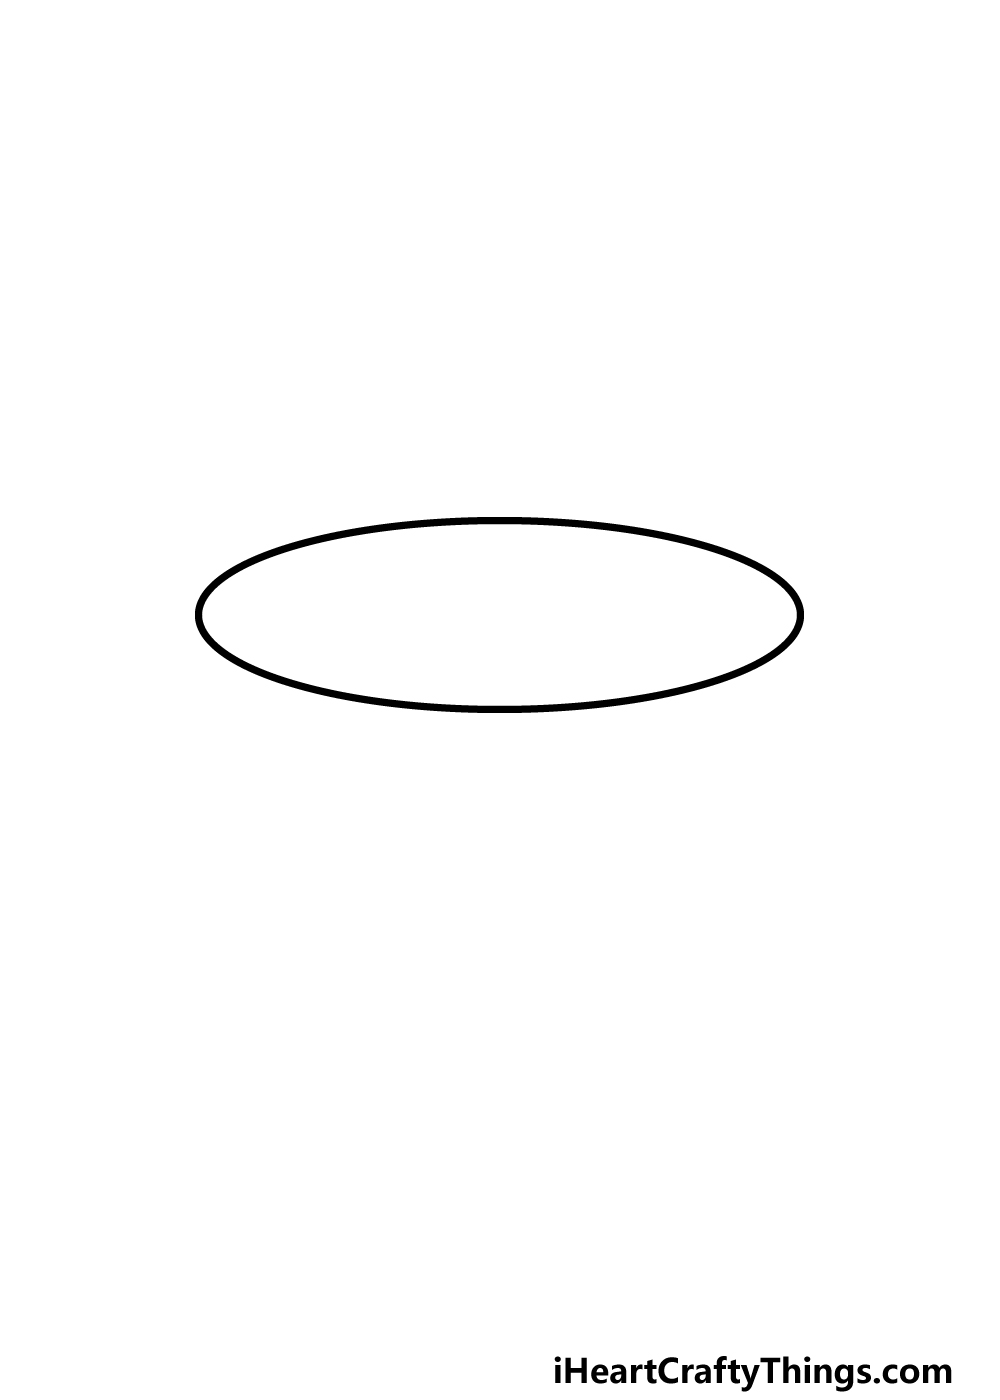 how to draw a Bowl step 1